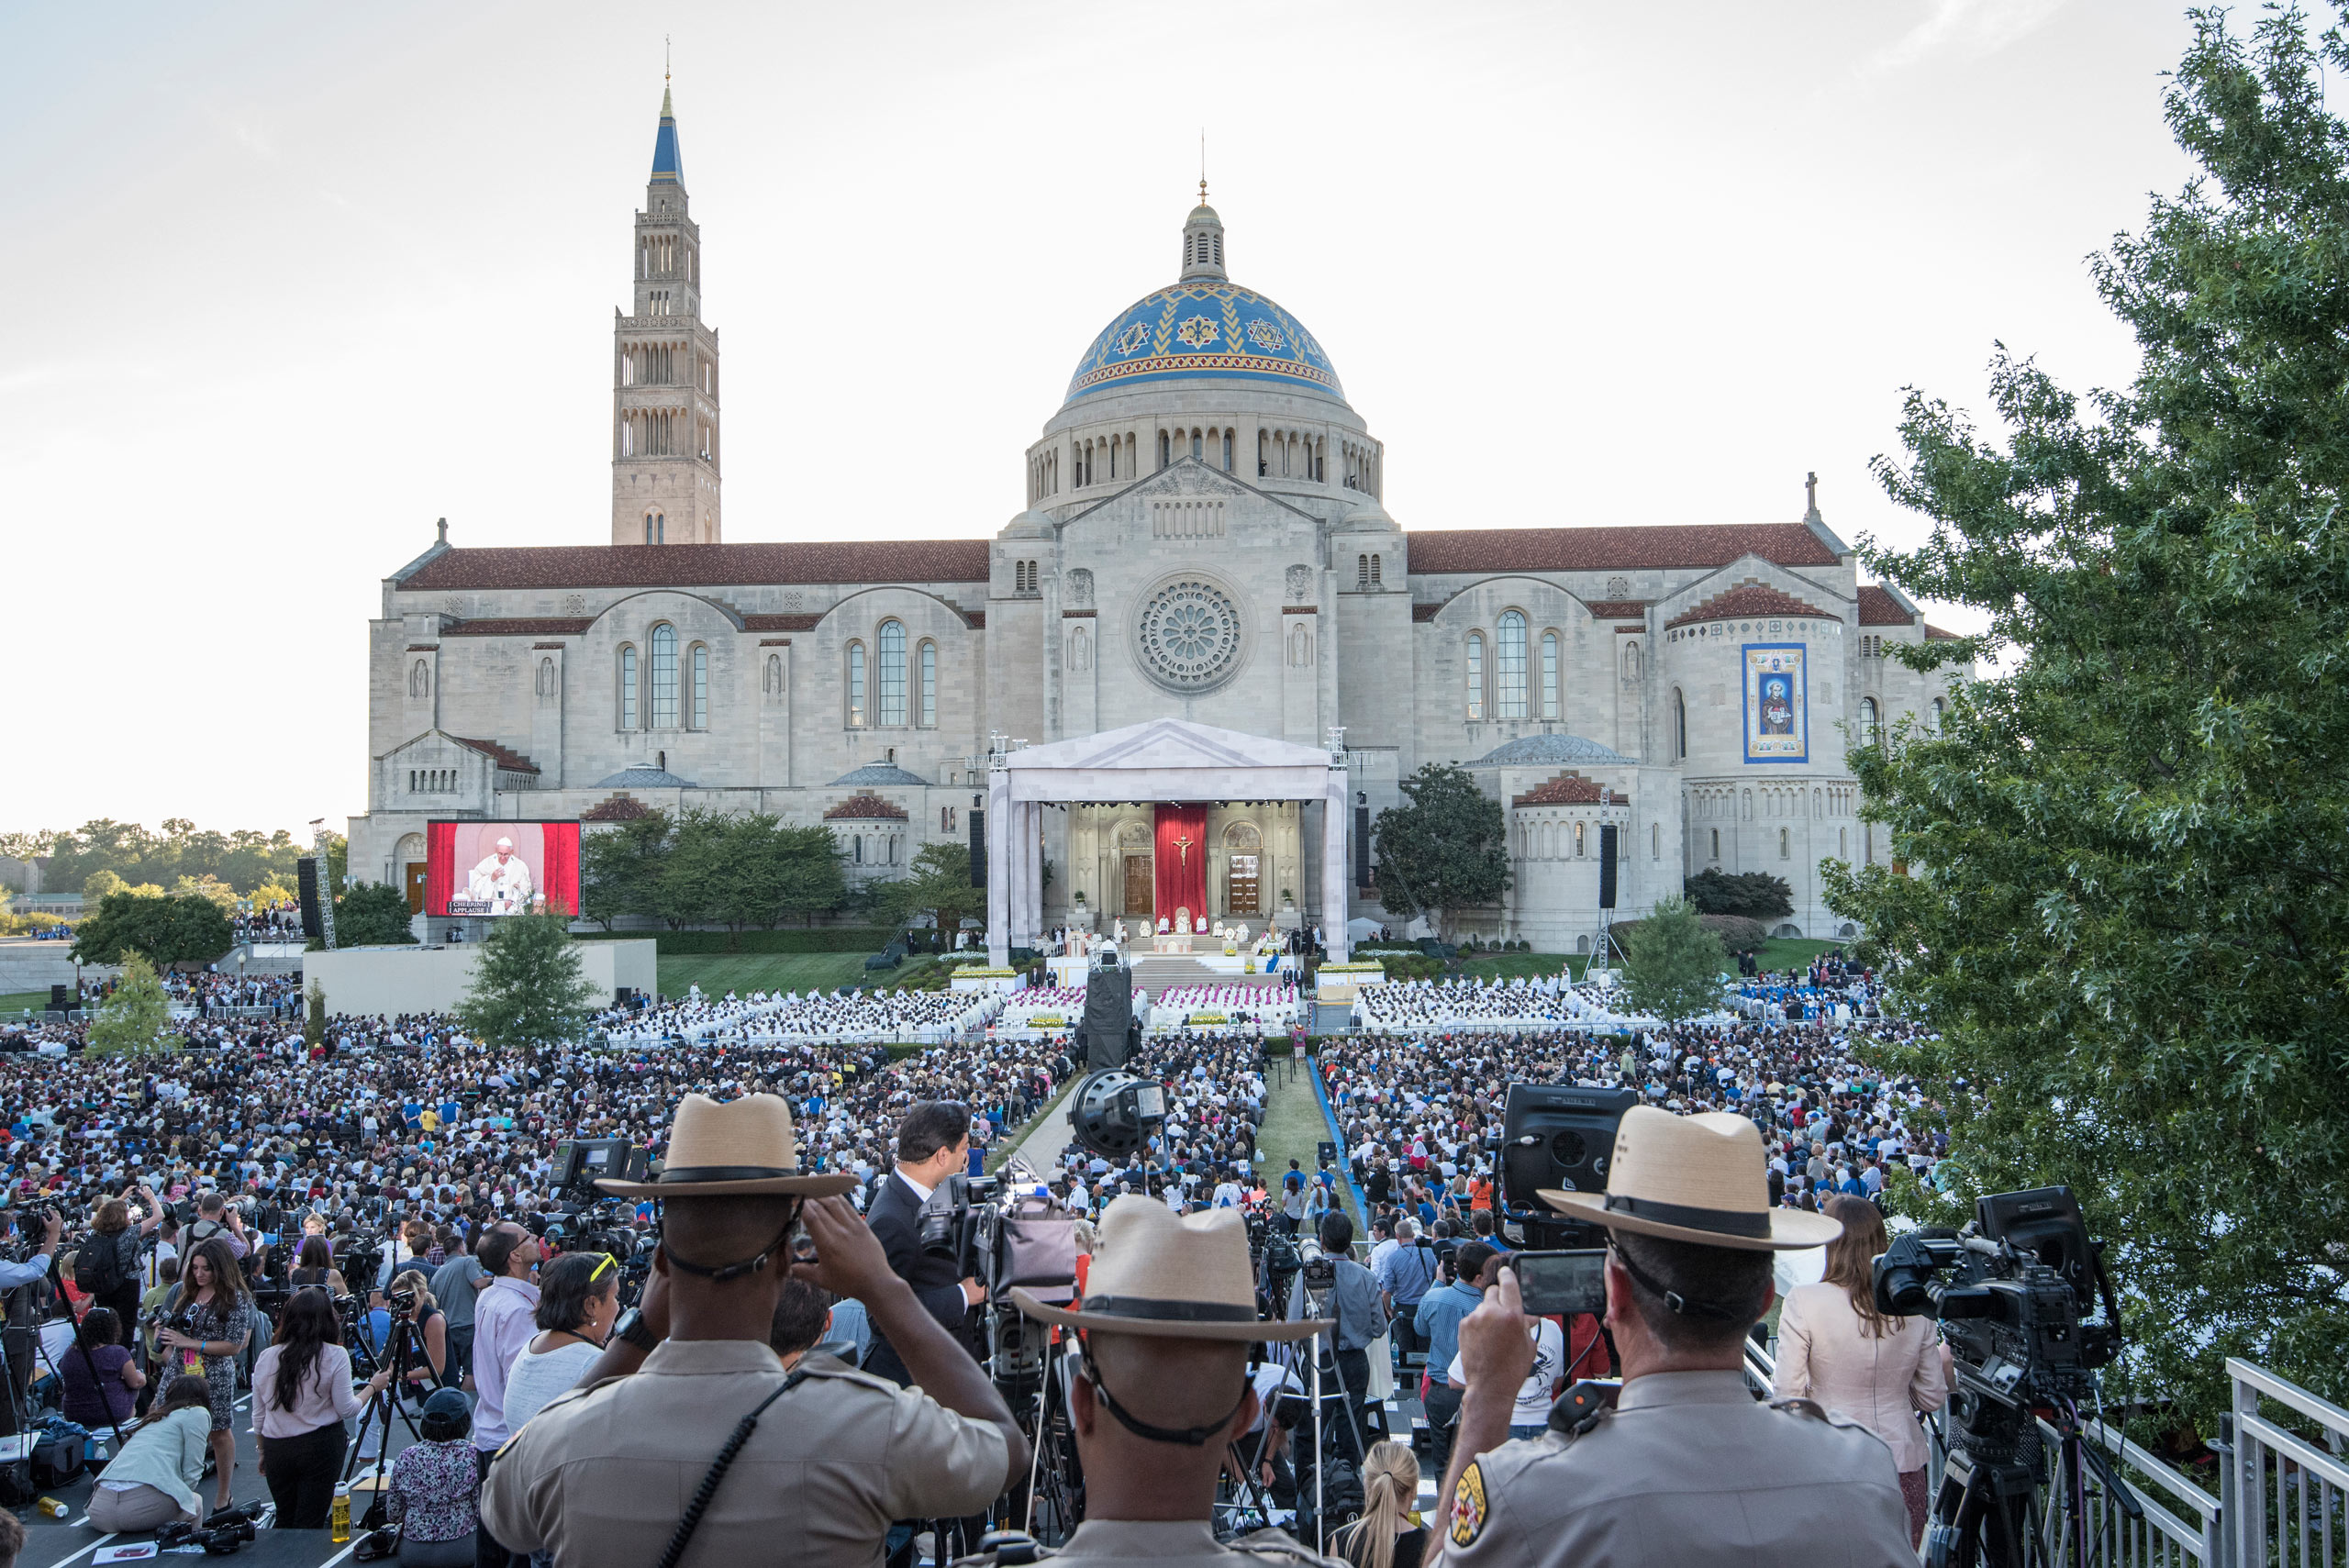 Pope Francis celebrates the canonization Mass for Junipero Serra at the Basilica of the National Shrine of the Immaculate Conception, Washington, D.C. Sept. 23, 2015.